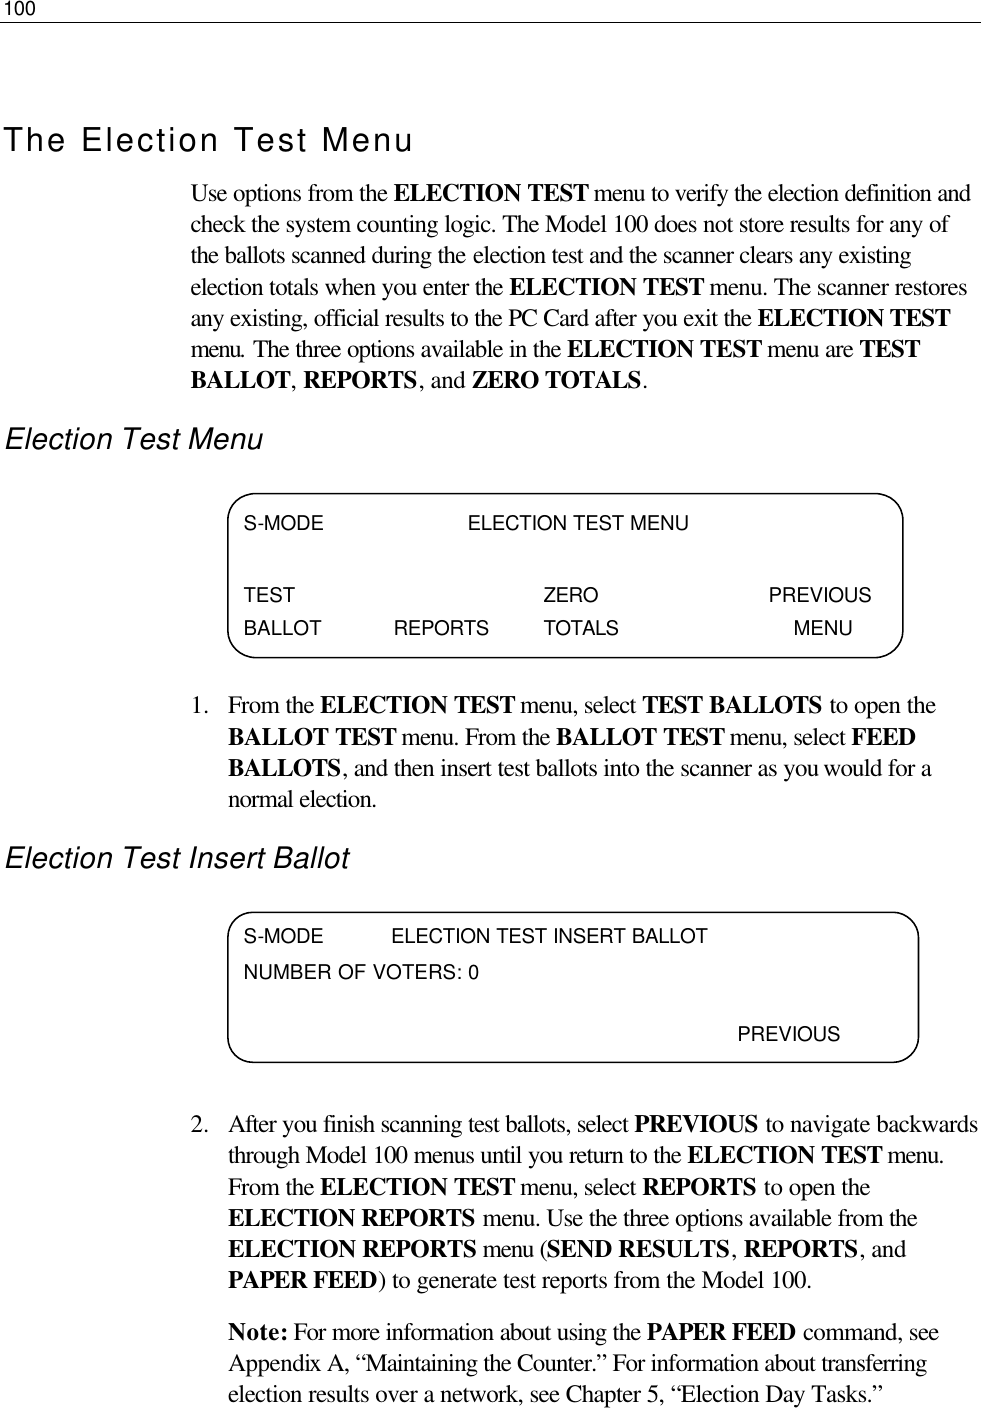 100   The Election Test Menu Use options from the ELECTION TEST menu to verify the election definition and check the system counting logic. The Model 100 does not store results for any of the ballots scanned during the election test and the scanner clears any existing election totals when you enter the ELECTION TEST menu. The scanner restores any existing, official results to the PC Card after you exit the ELECTION TEST menu. The three options available in the ELECTION TEST menu are TEST BALLOT, REPORTS, and ZERO TOTALS. Election Test Menu     1.  From the ELECTION TEST menu, select TEST BALLOTS to open the BALLOT TEST menu. From the BALLOT TEST menu, select FEED BALLOTS, and then insert test ballots into the scanner as you would for a normal election.  Election Test Insert Ballot     2.  After you finish scanning test ballots, select PREVIOUS to navigate backwards through Model 100 menus until you return to the ELECTION TEST menu. From the ELECTION TEST menu, select REPORTS to open the ELECTION REPORTS menu. Use the three options available from the ELECTION REPORTS menu (SEND RESULTS, REPORTS, and PAPER FEED) to generate test reports from the Model 100.  Note: For more information about using the PAPER FEED command, see Appendix A, “Maintaining the Counter.” For information about transferring election results over a network, see Chapter 5, “Election Day Tasks.” S-MODE                       ELECTION TEST MENU  TEST    ZERO   PREVIOUS BALLOT REPORTS TOTALS        MENU      S-MODE           ELECTION TEST INSERT BALLOT       NUMBER OF VOTERS: 0         PREVIOUS  